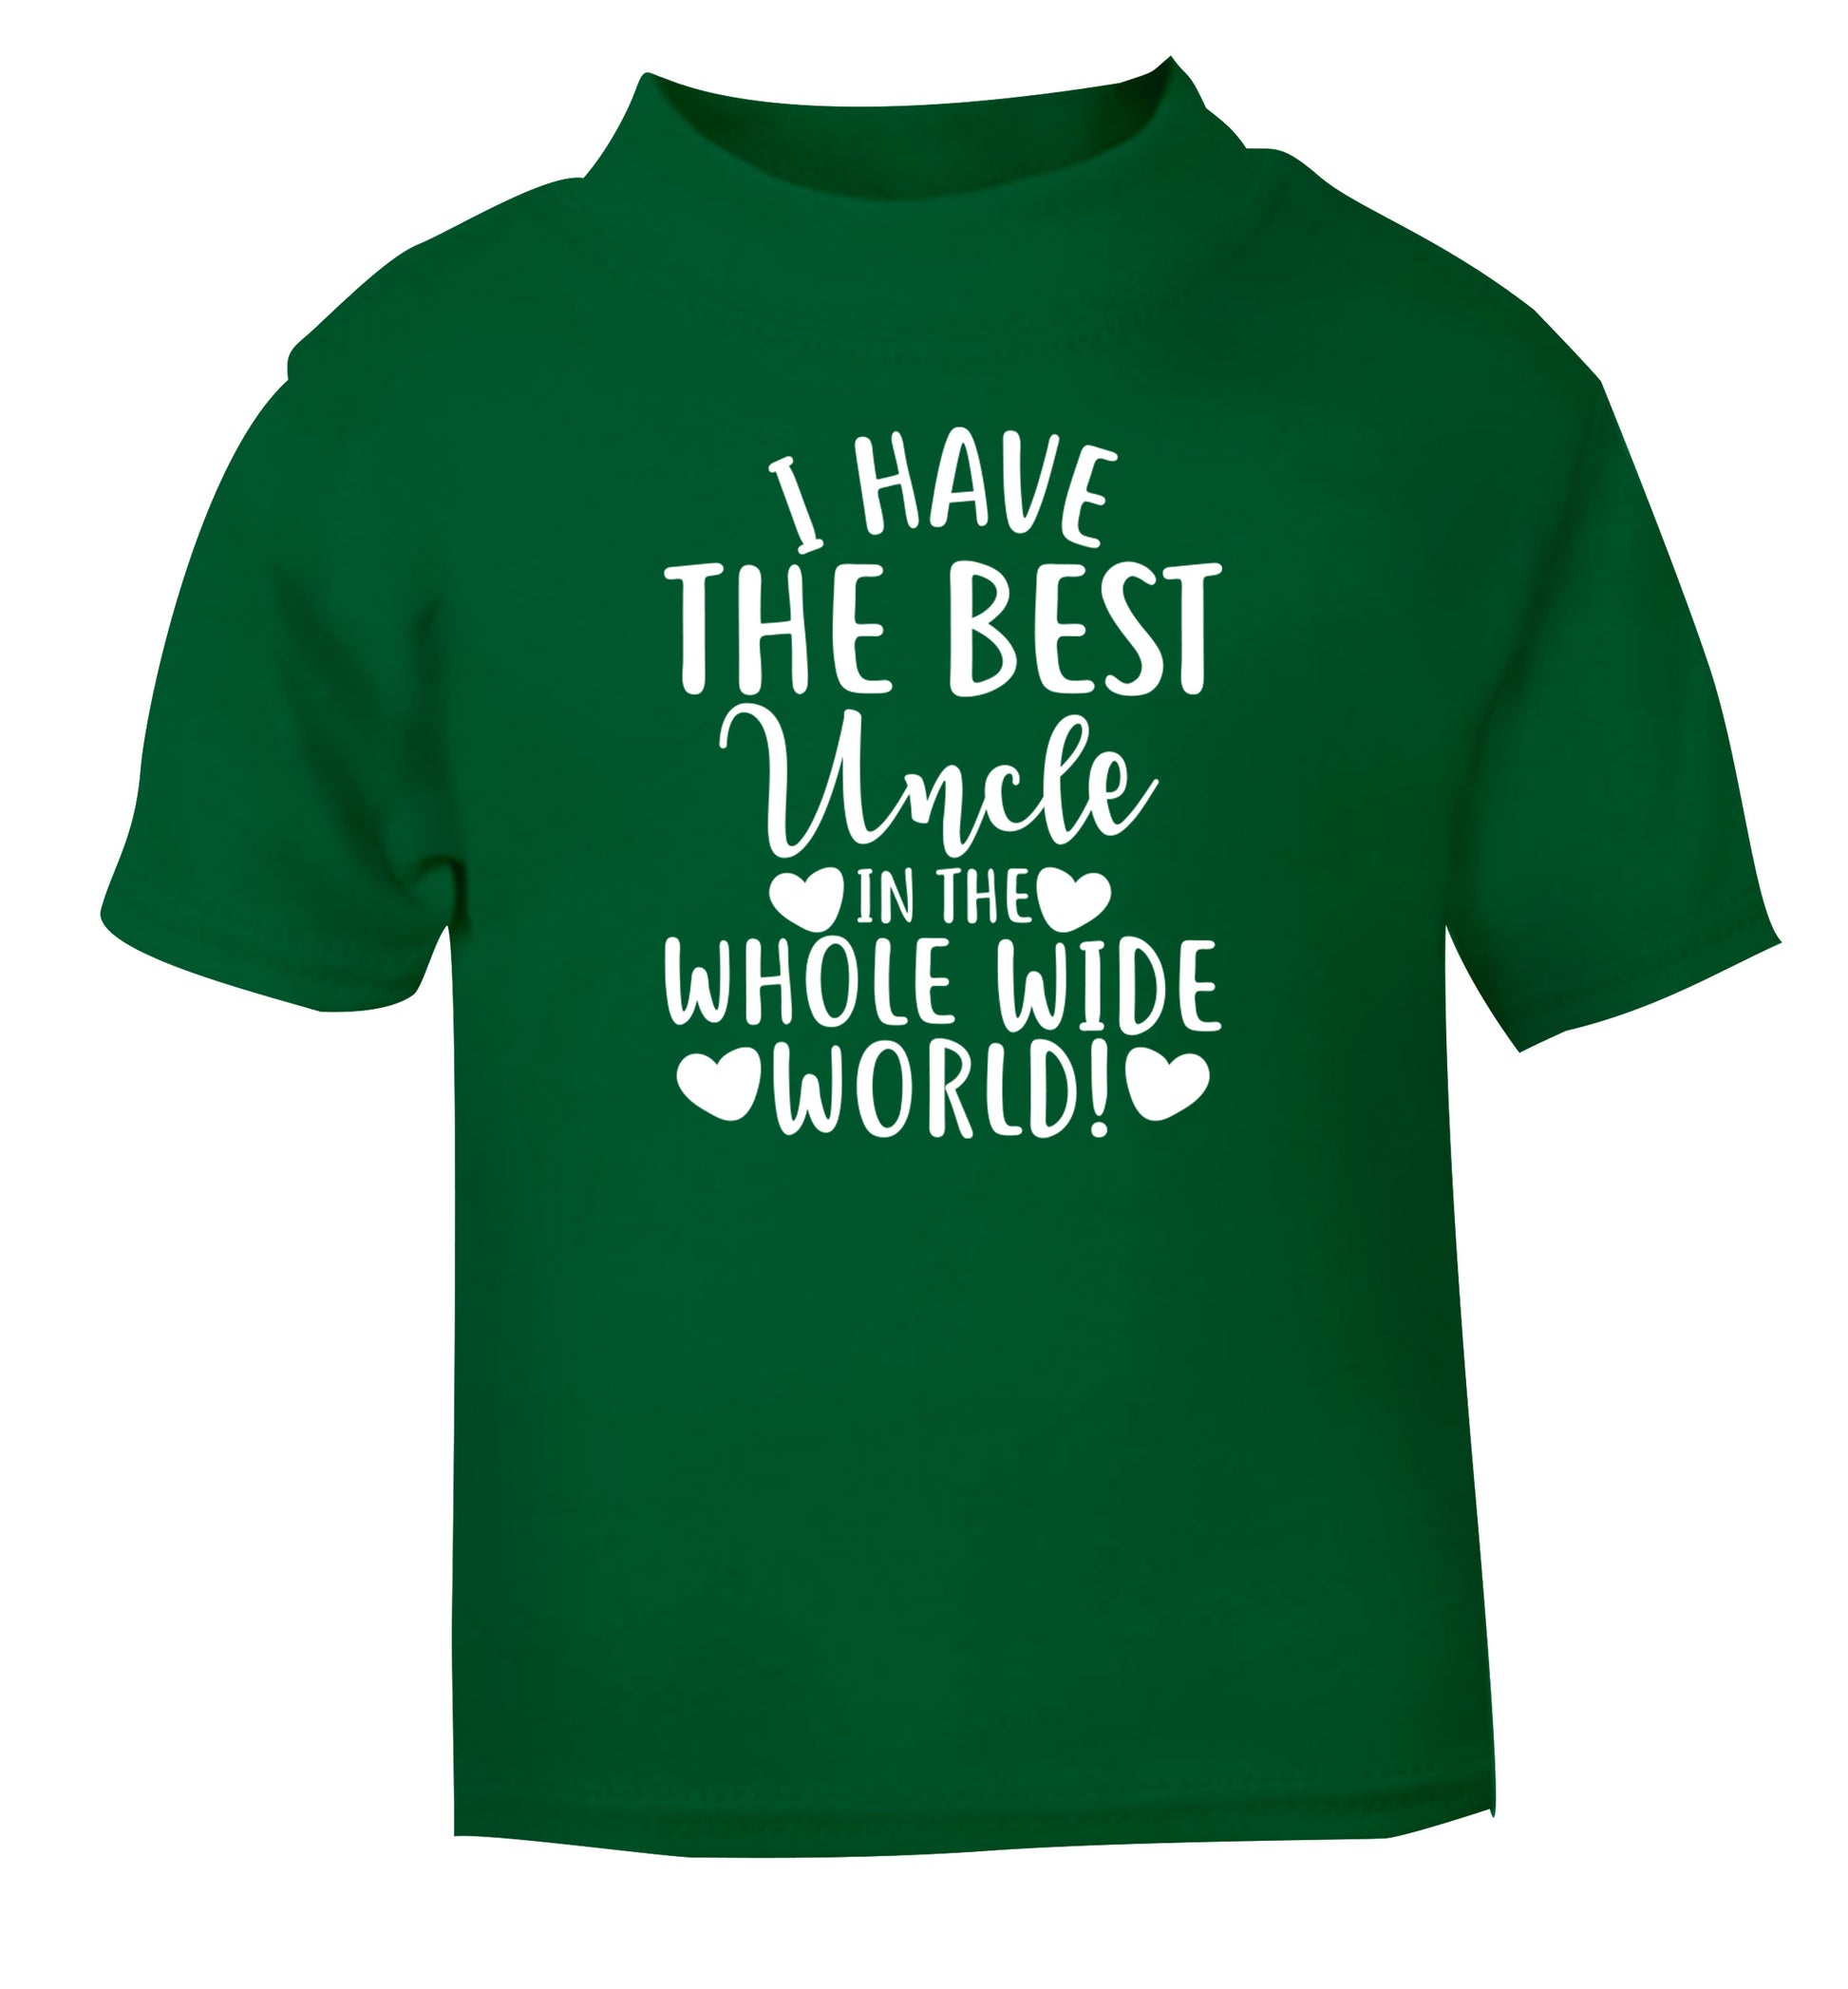 I have the best uncle in the whole wide world! green Baby Toddler Tshirt 2 Years